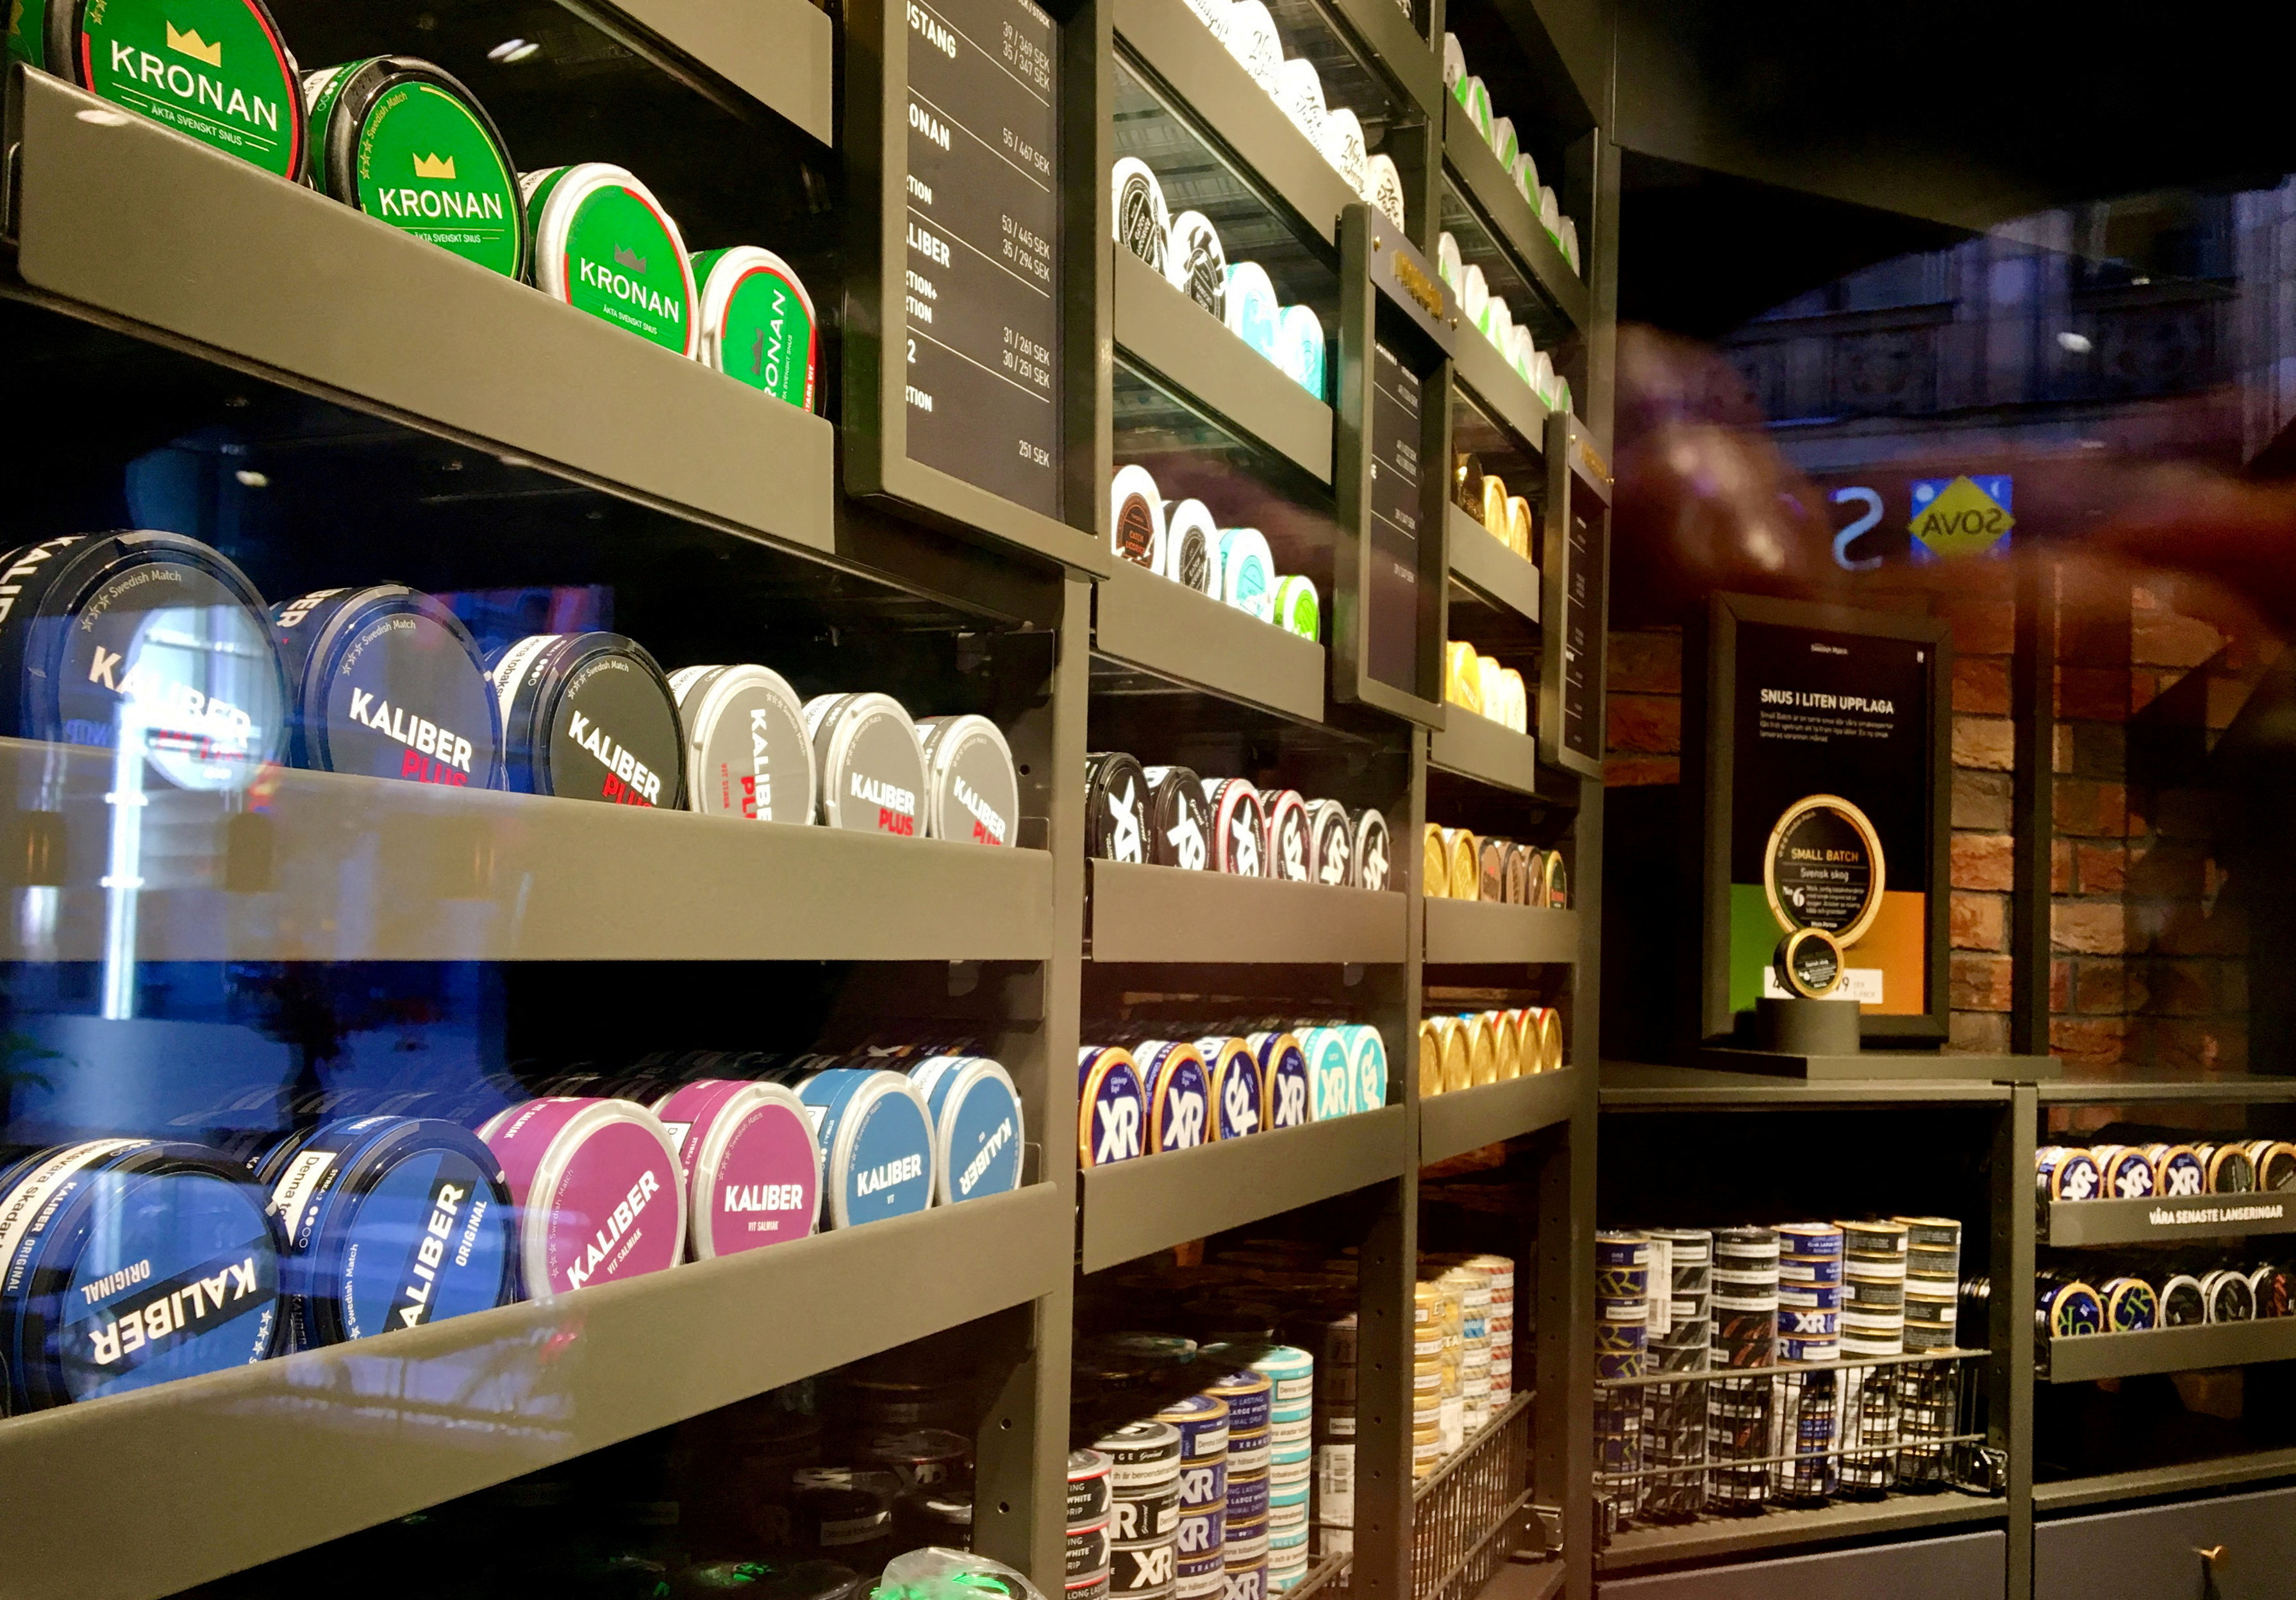 Moist powder tobacco "snus" cans are seen on shelves at a Swedish Match store in Stockholm